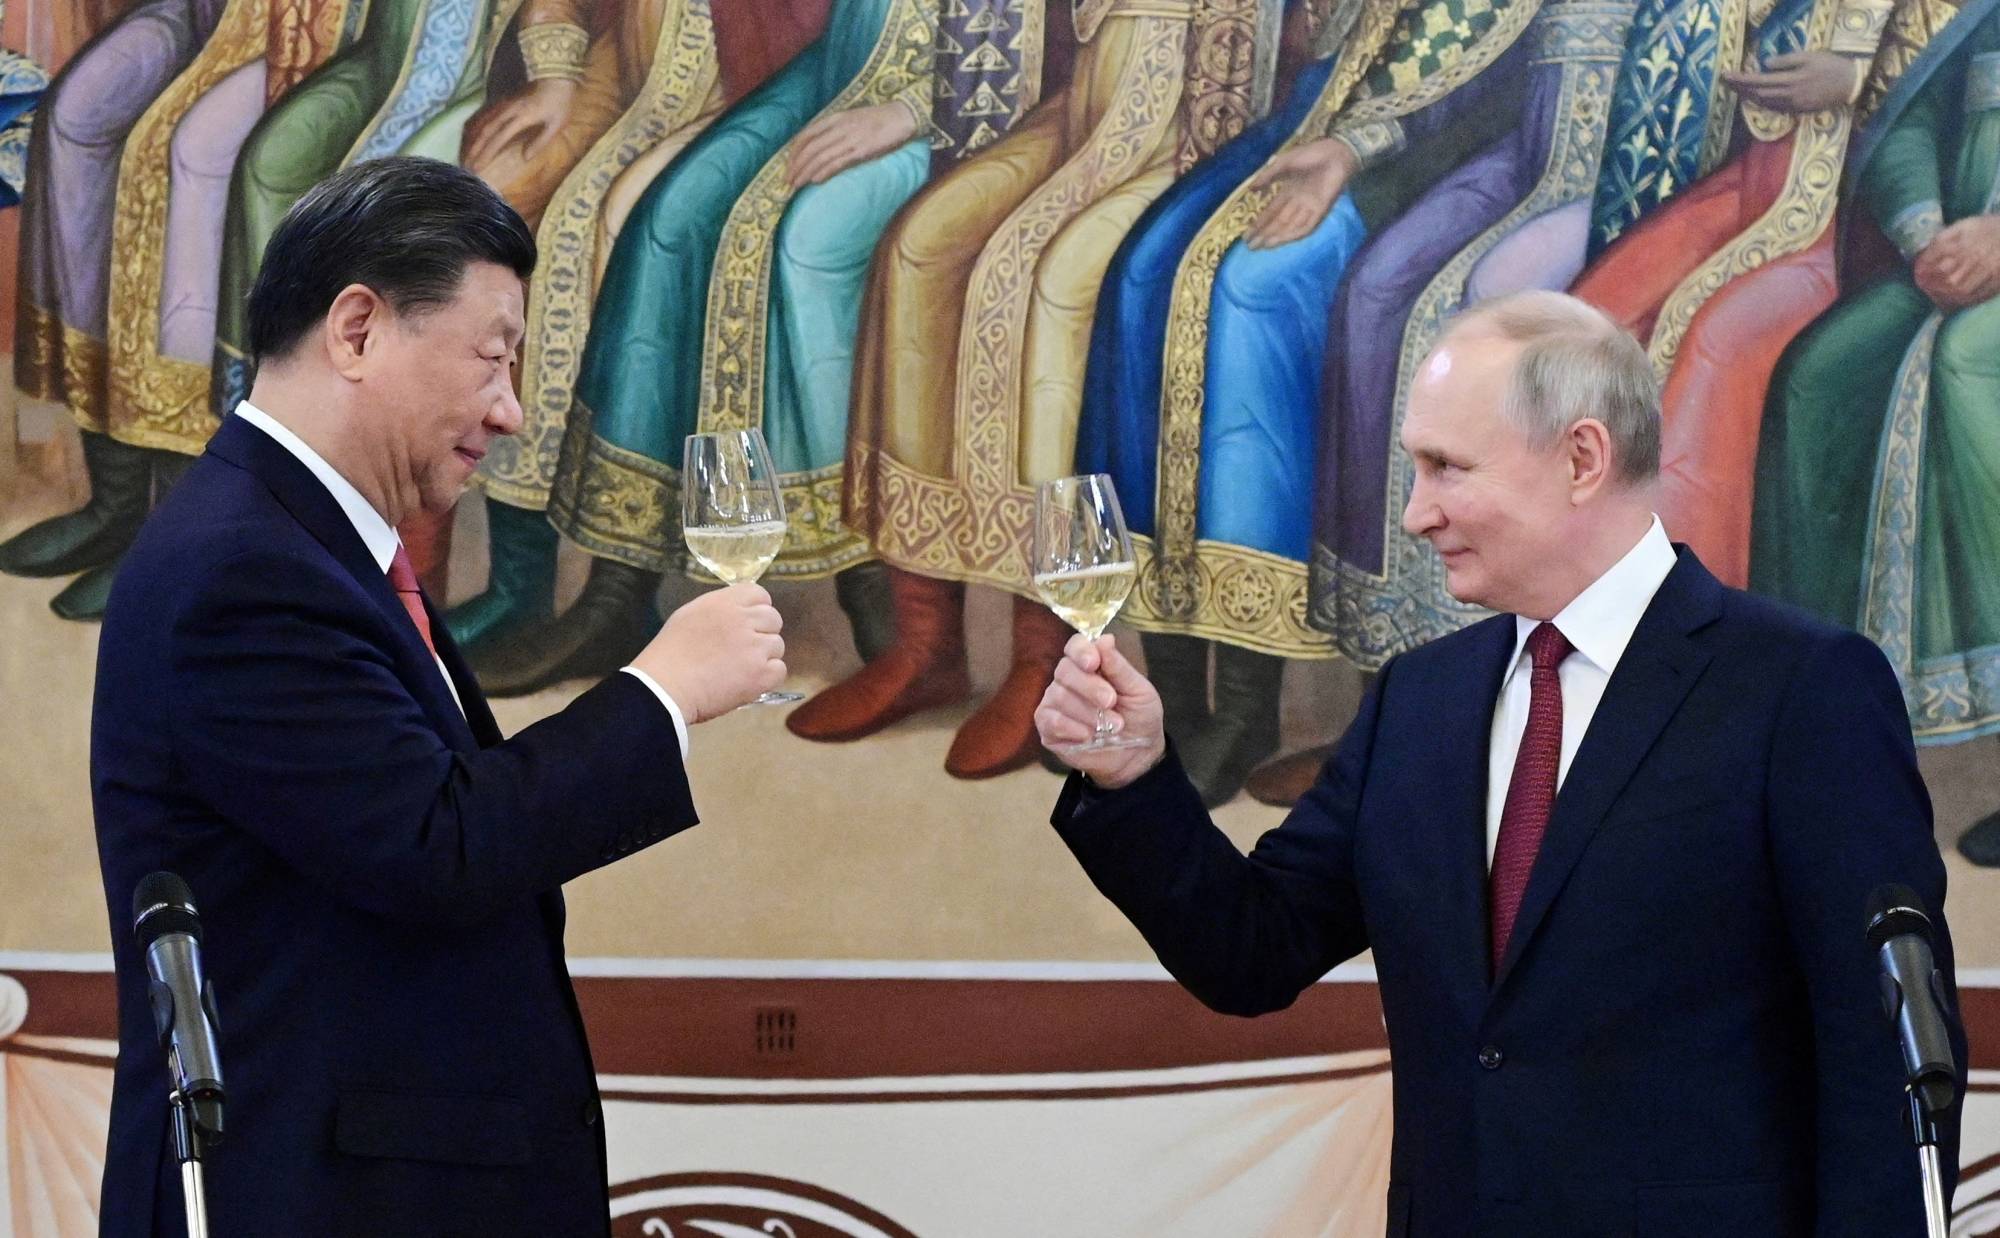 Putin Claims There's No Russia-China Military Alliance